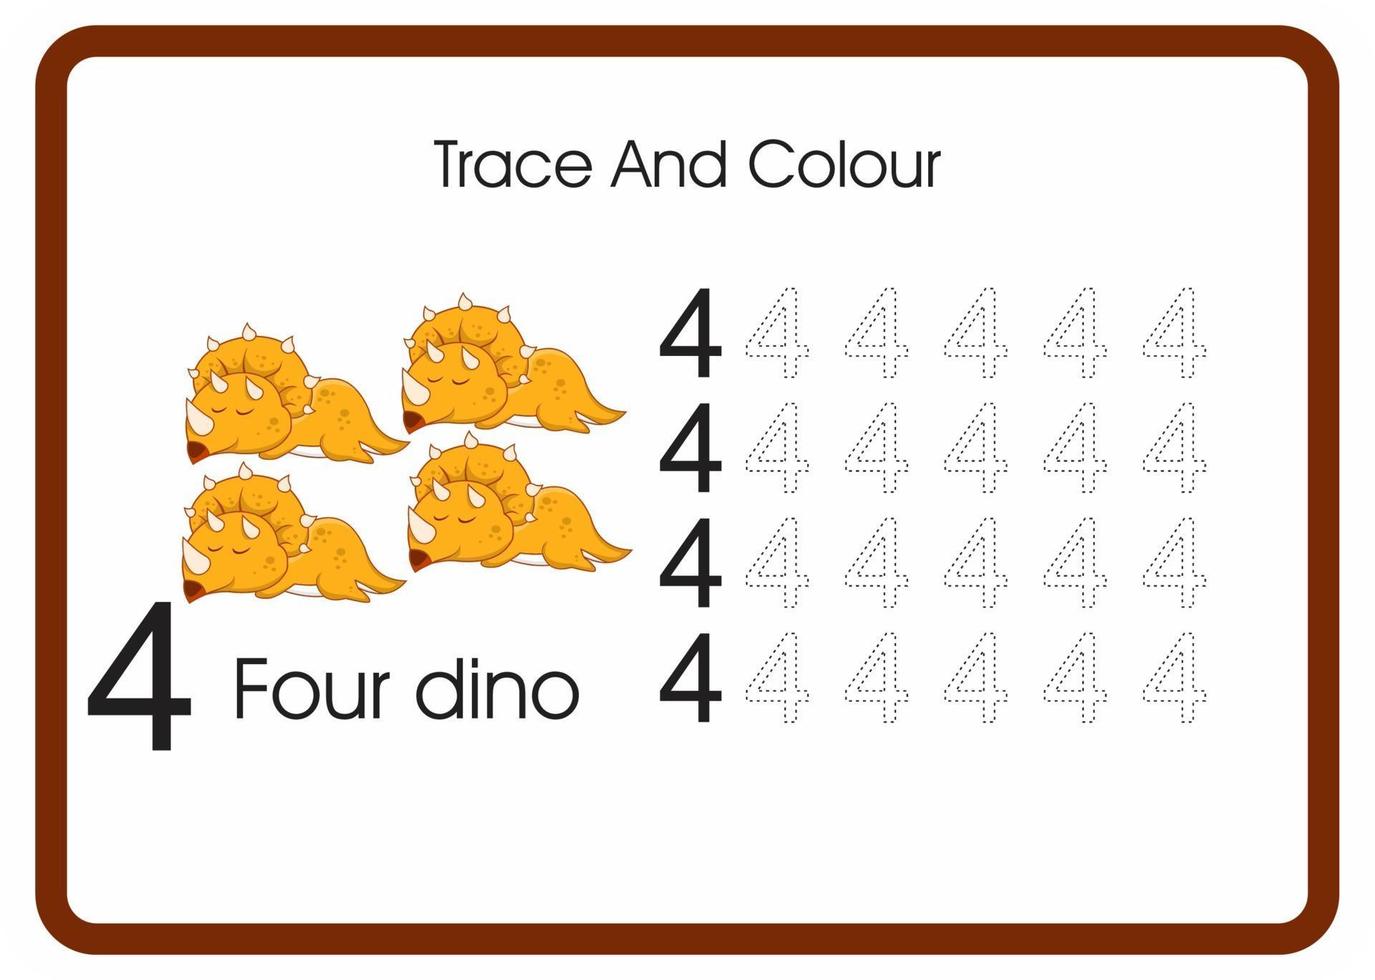 count trace and colour dino orange number 4 vector